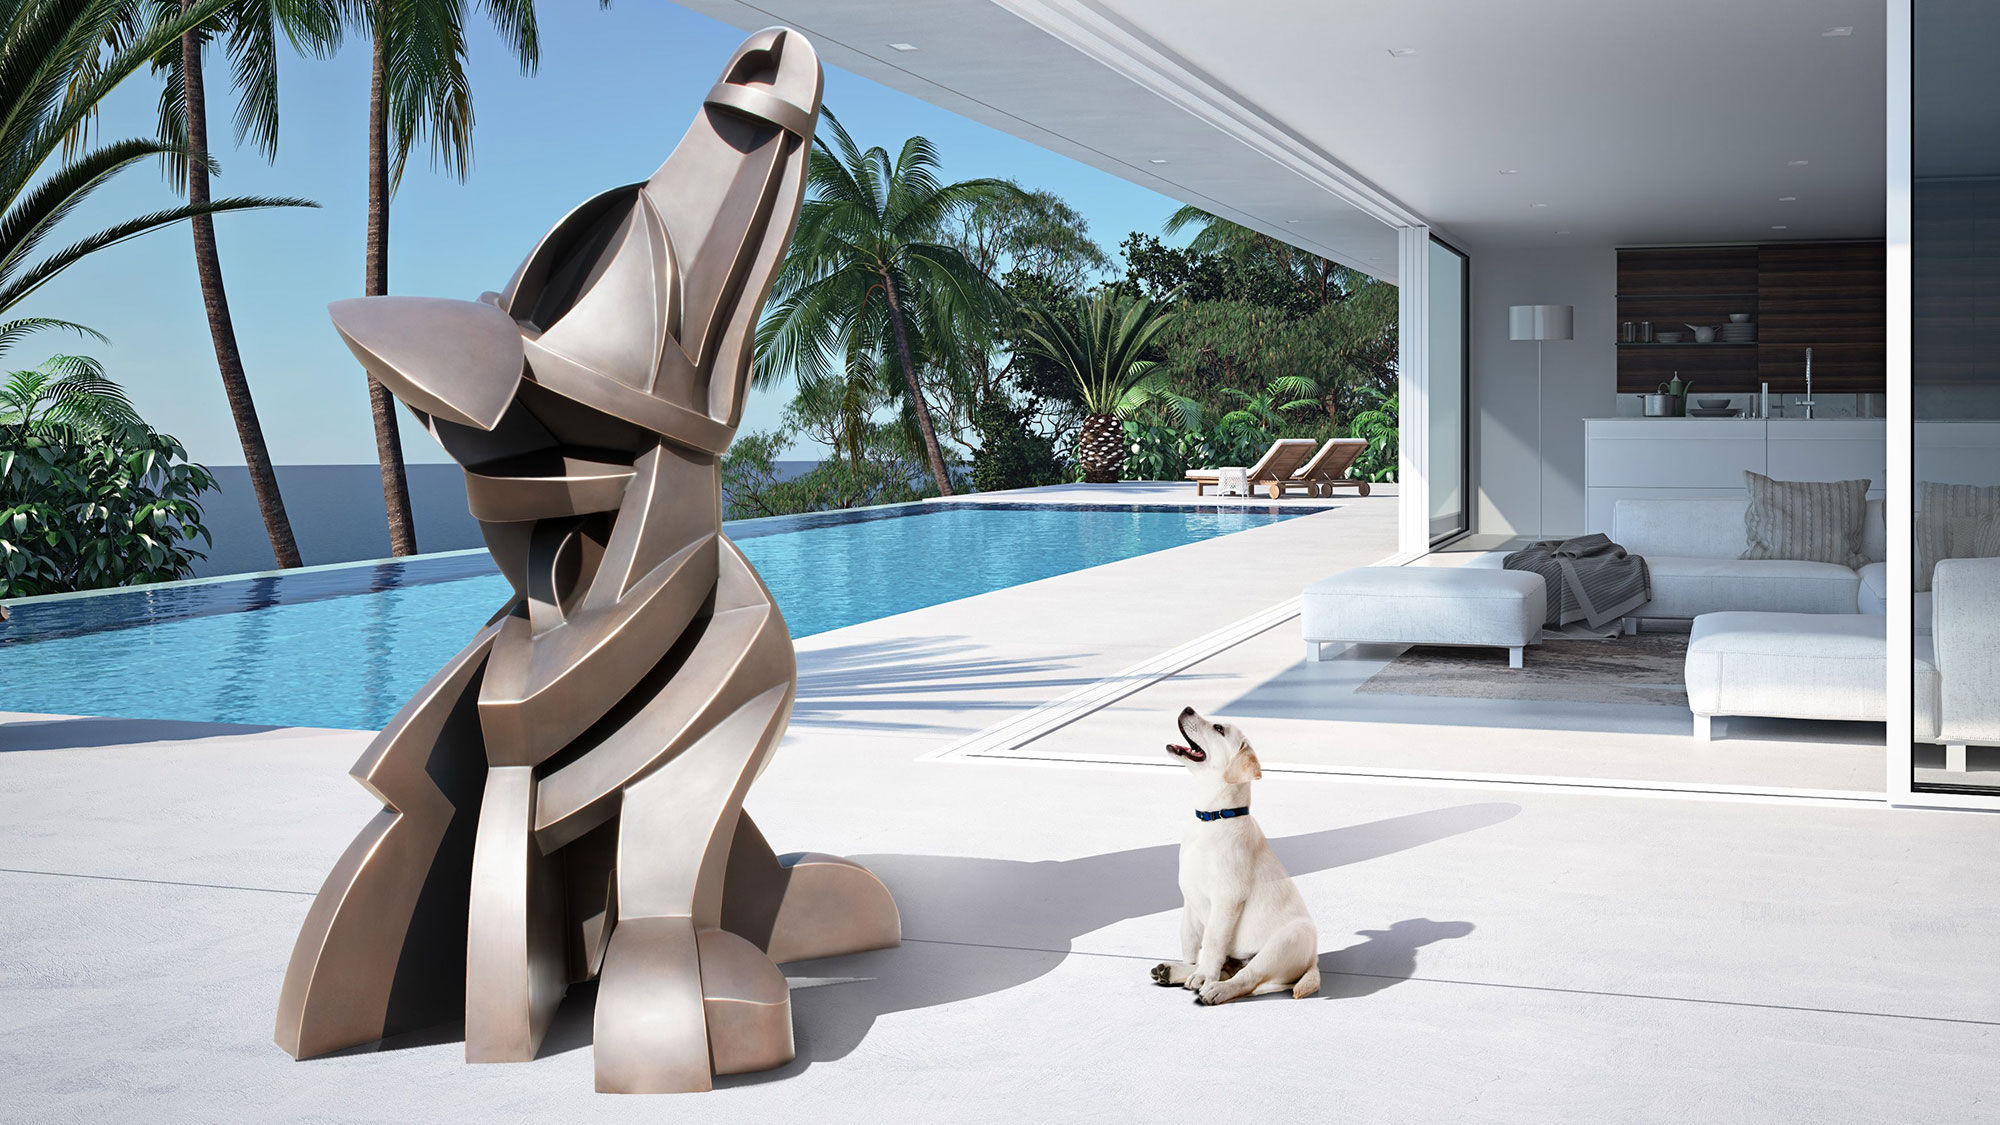 The Scoops puppy sculpture is meant to invoke a childlike sense of amazement.